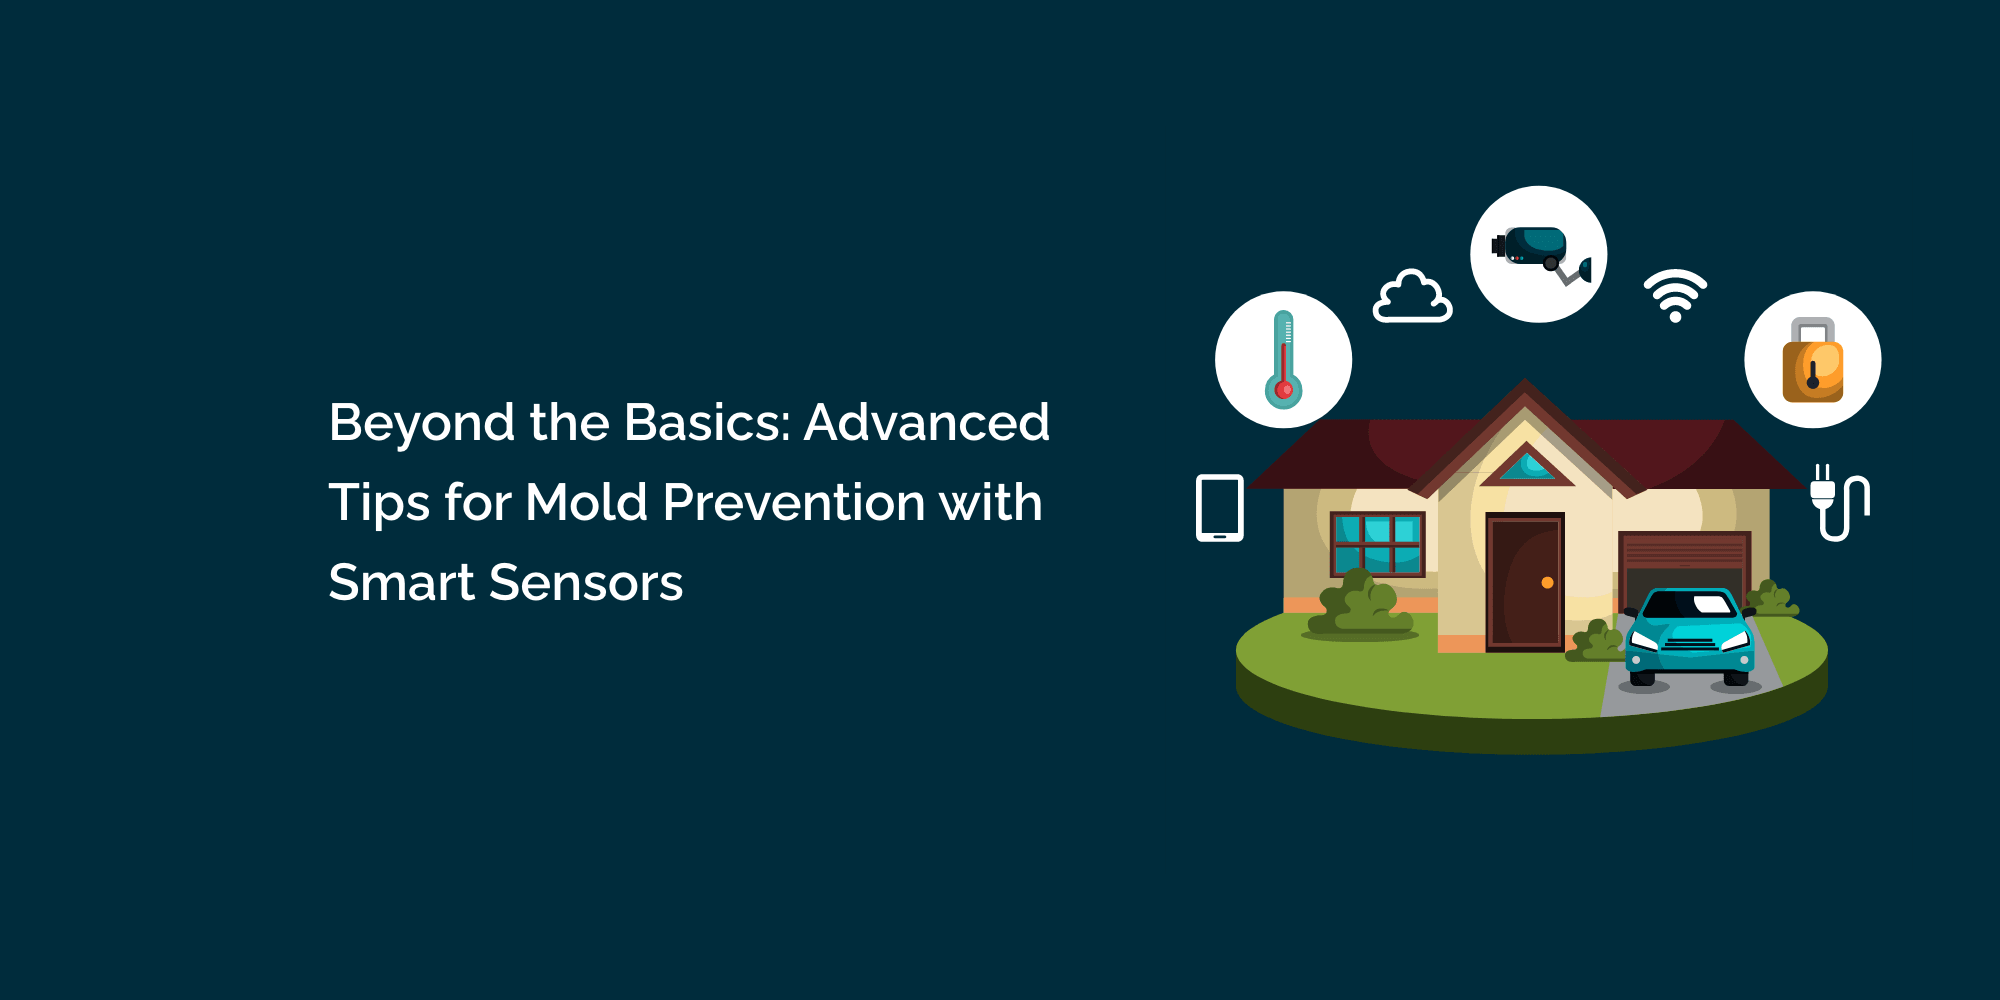 Beyond the Basics: Advanced Tips for Mold Prevention with Smart Sensors